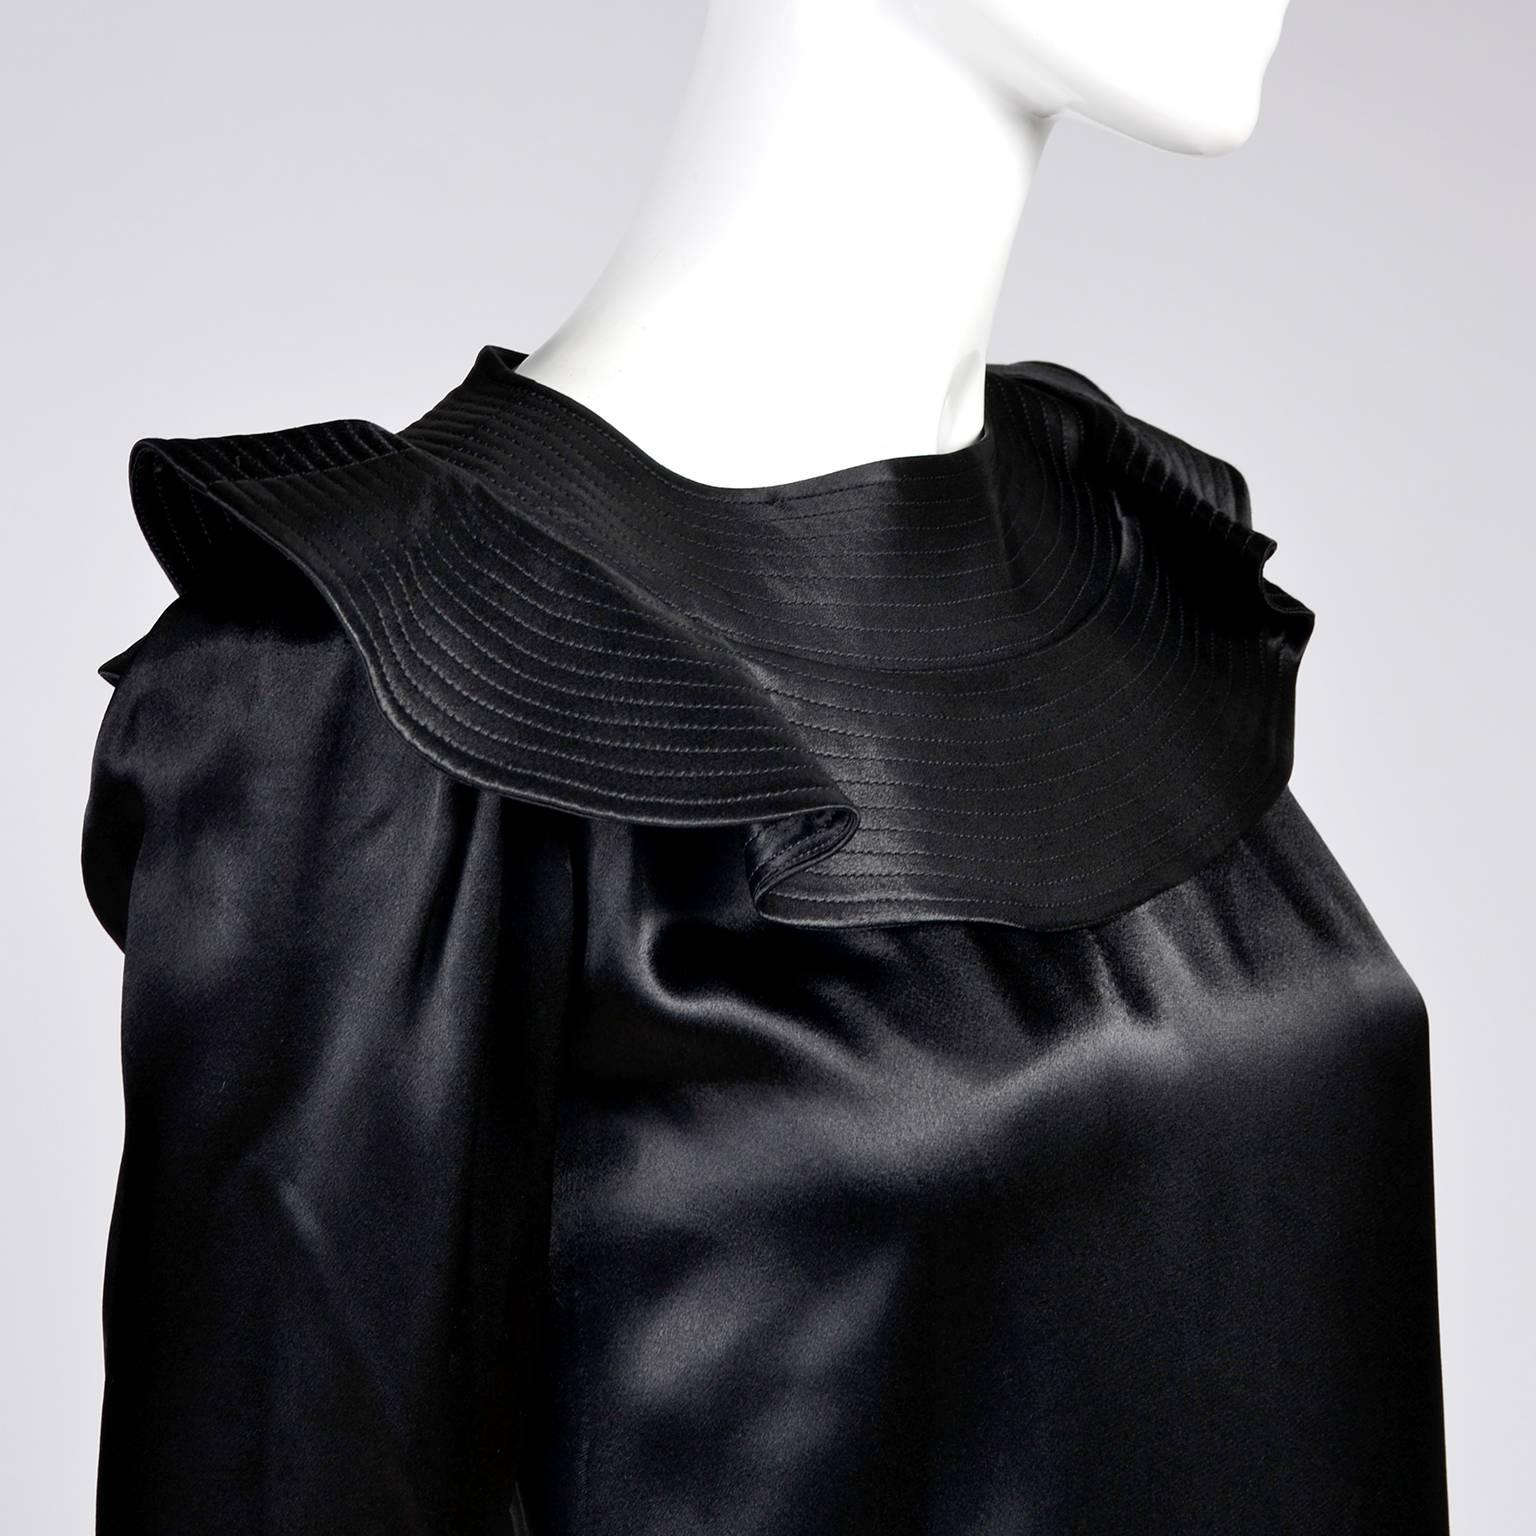 This beautiful vintage dress was designed by Albert Nipon in the 1970's. The dress is black satin with a ruff collar that has rows of topstitching. This is such a great dress and doesn't show as well in photos as it presents in person. It would be a